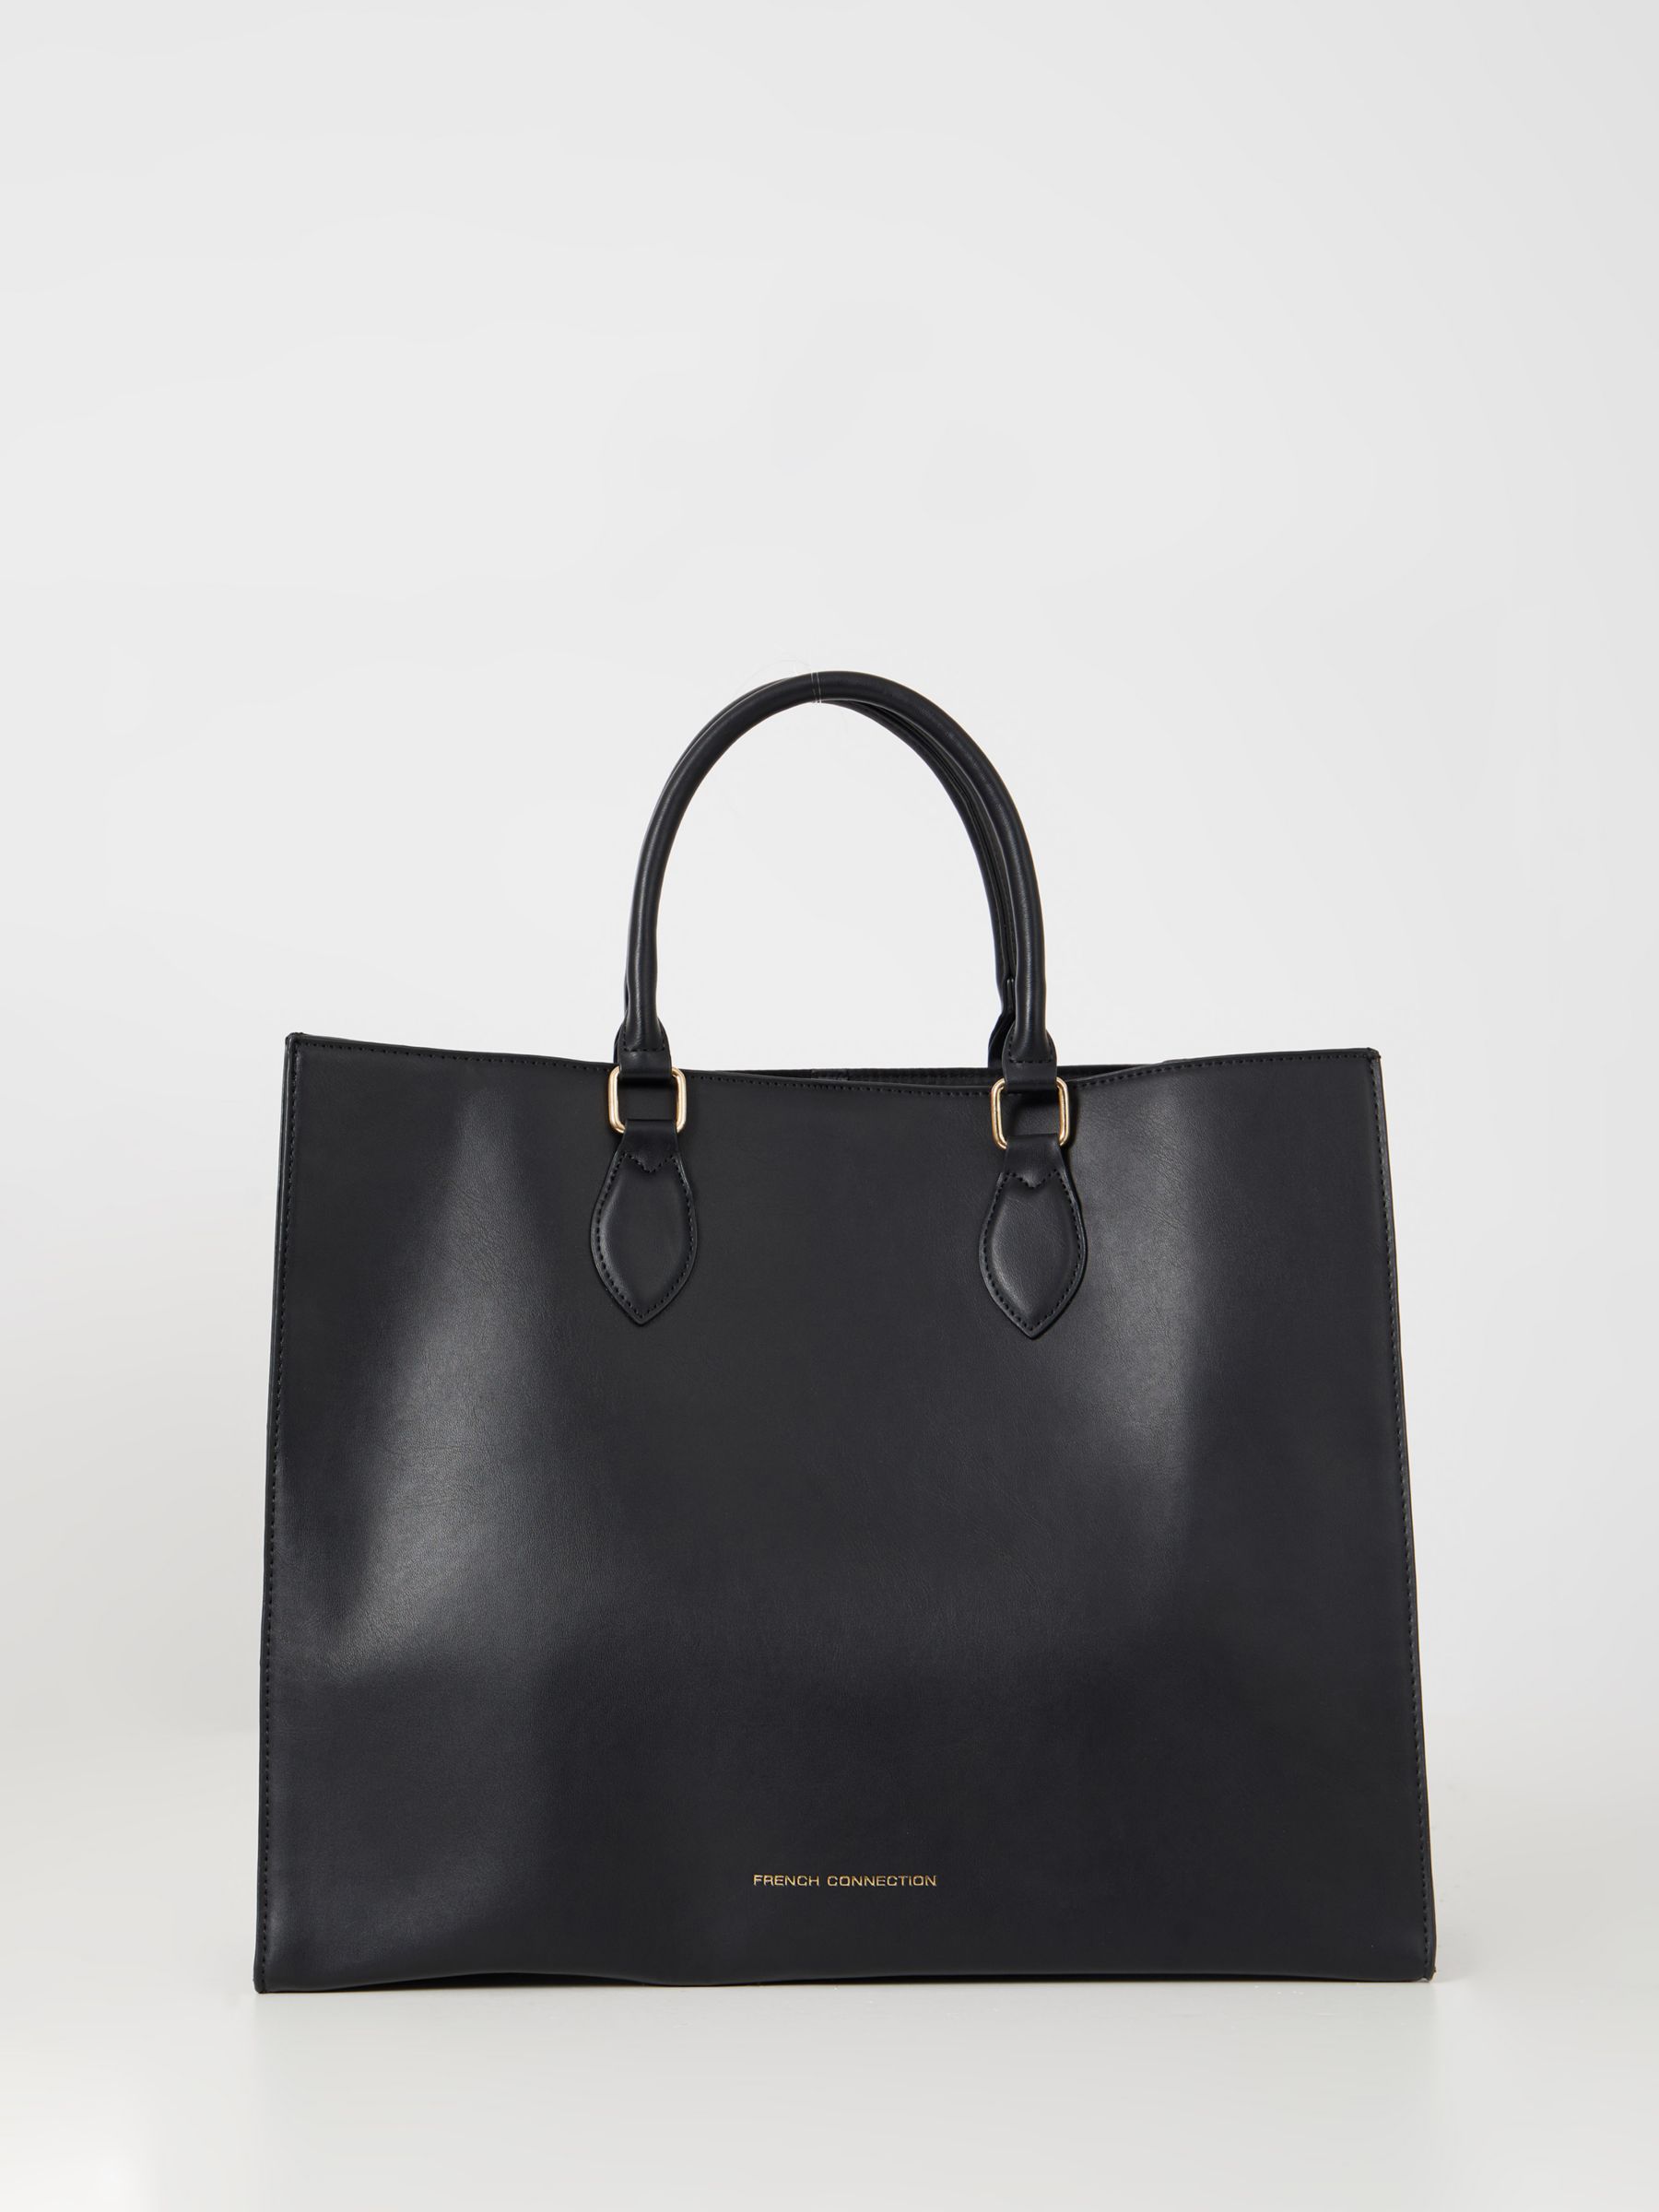 French Connection Faux Leather Square Tote Bag, Black